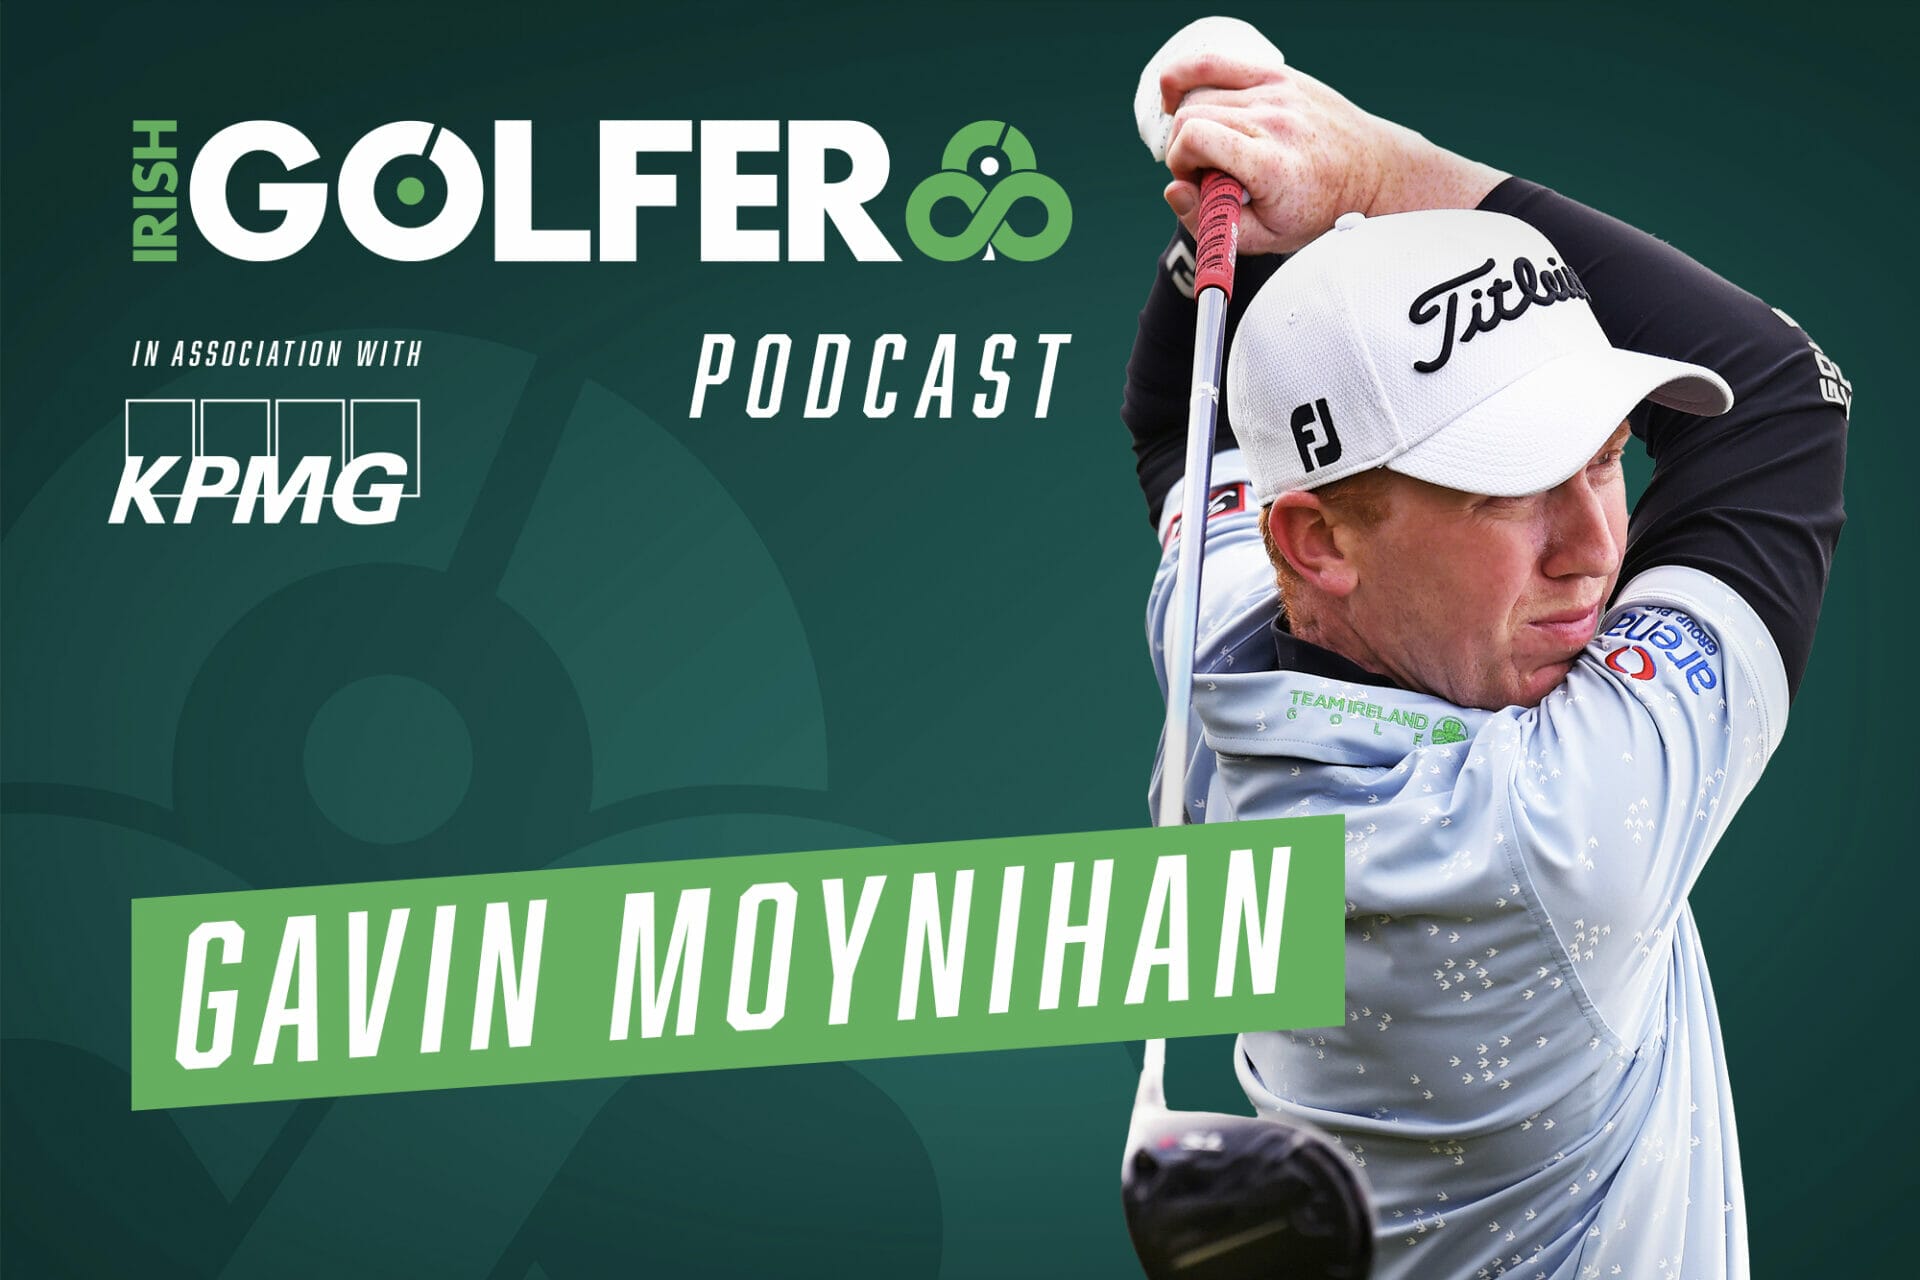 Podcast: Gavin Moynihan on missed cut frustrations and fresh beginnings